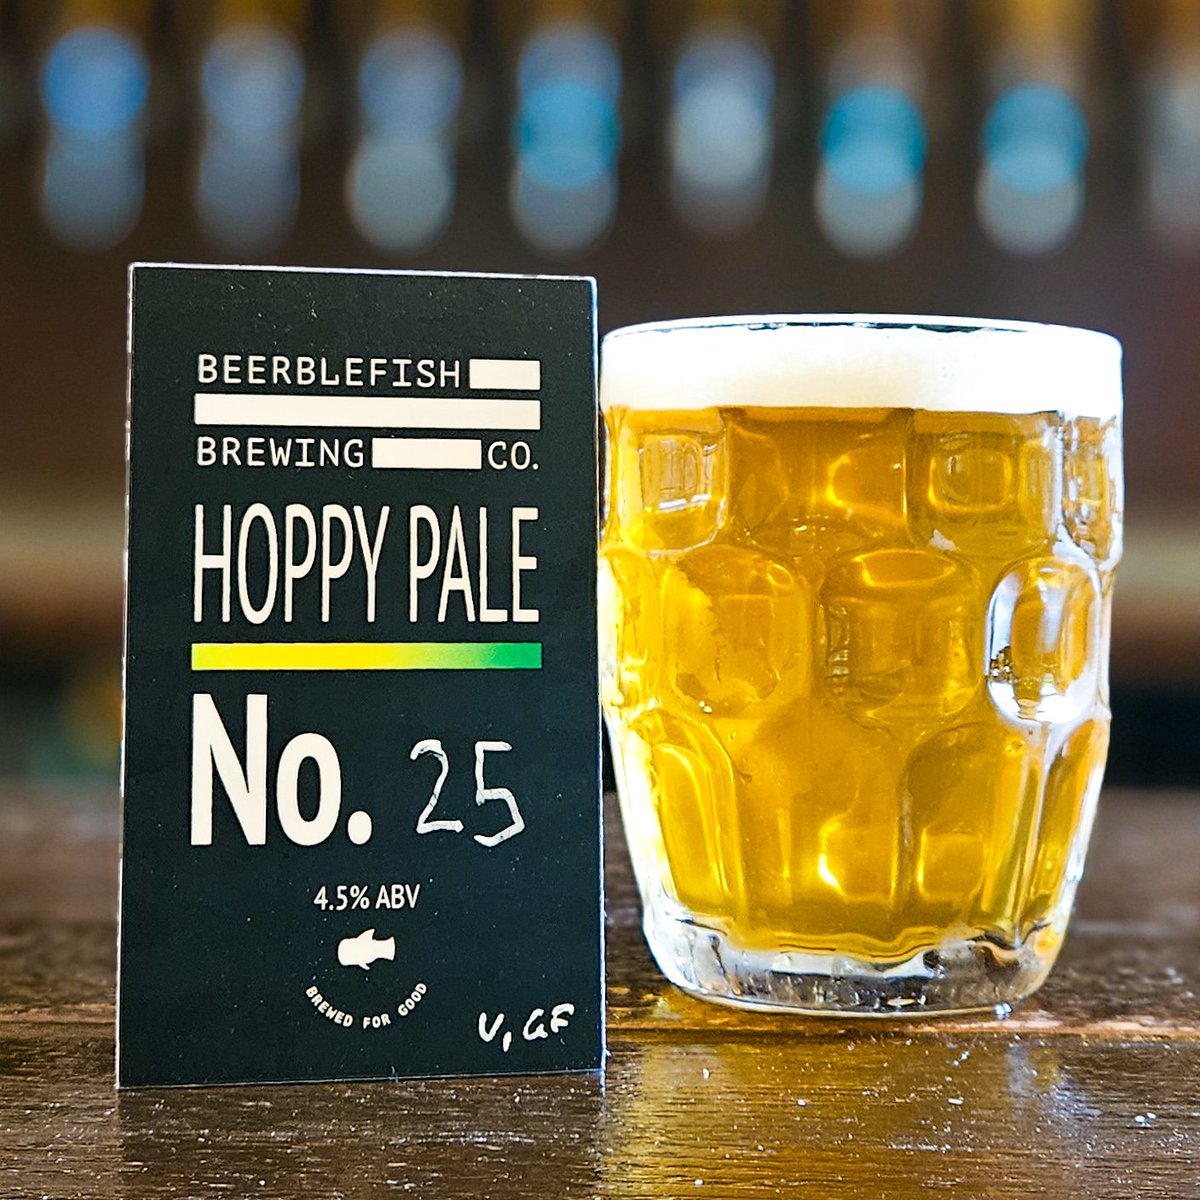 New On Cask! We have fan favourites @beerblefish back on Cask with their Hoppy Pale No.25. This easy drinking Pale is hopped with Ernest and Godiva for Citrus, Spice and Gooseberry flavours on a Honey Malt body. Come drink the good stuff!